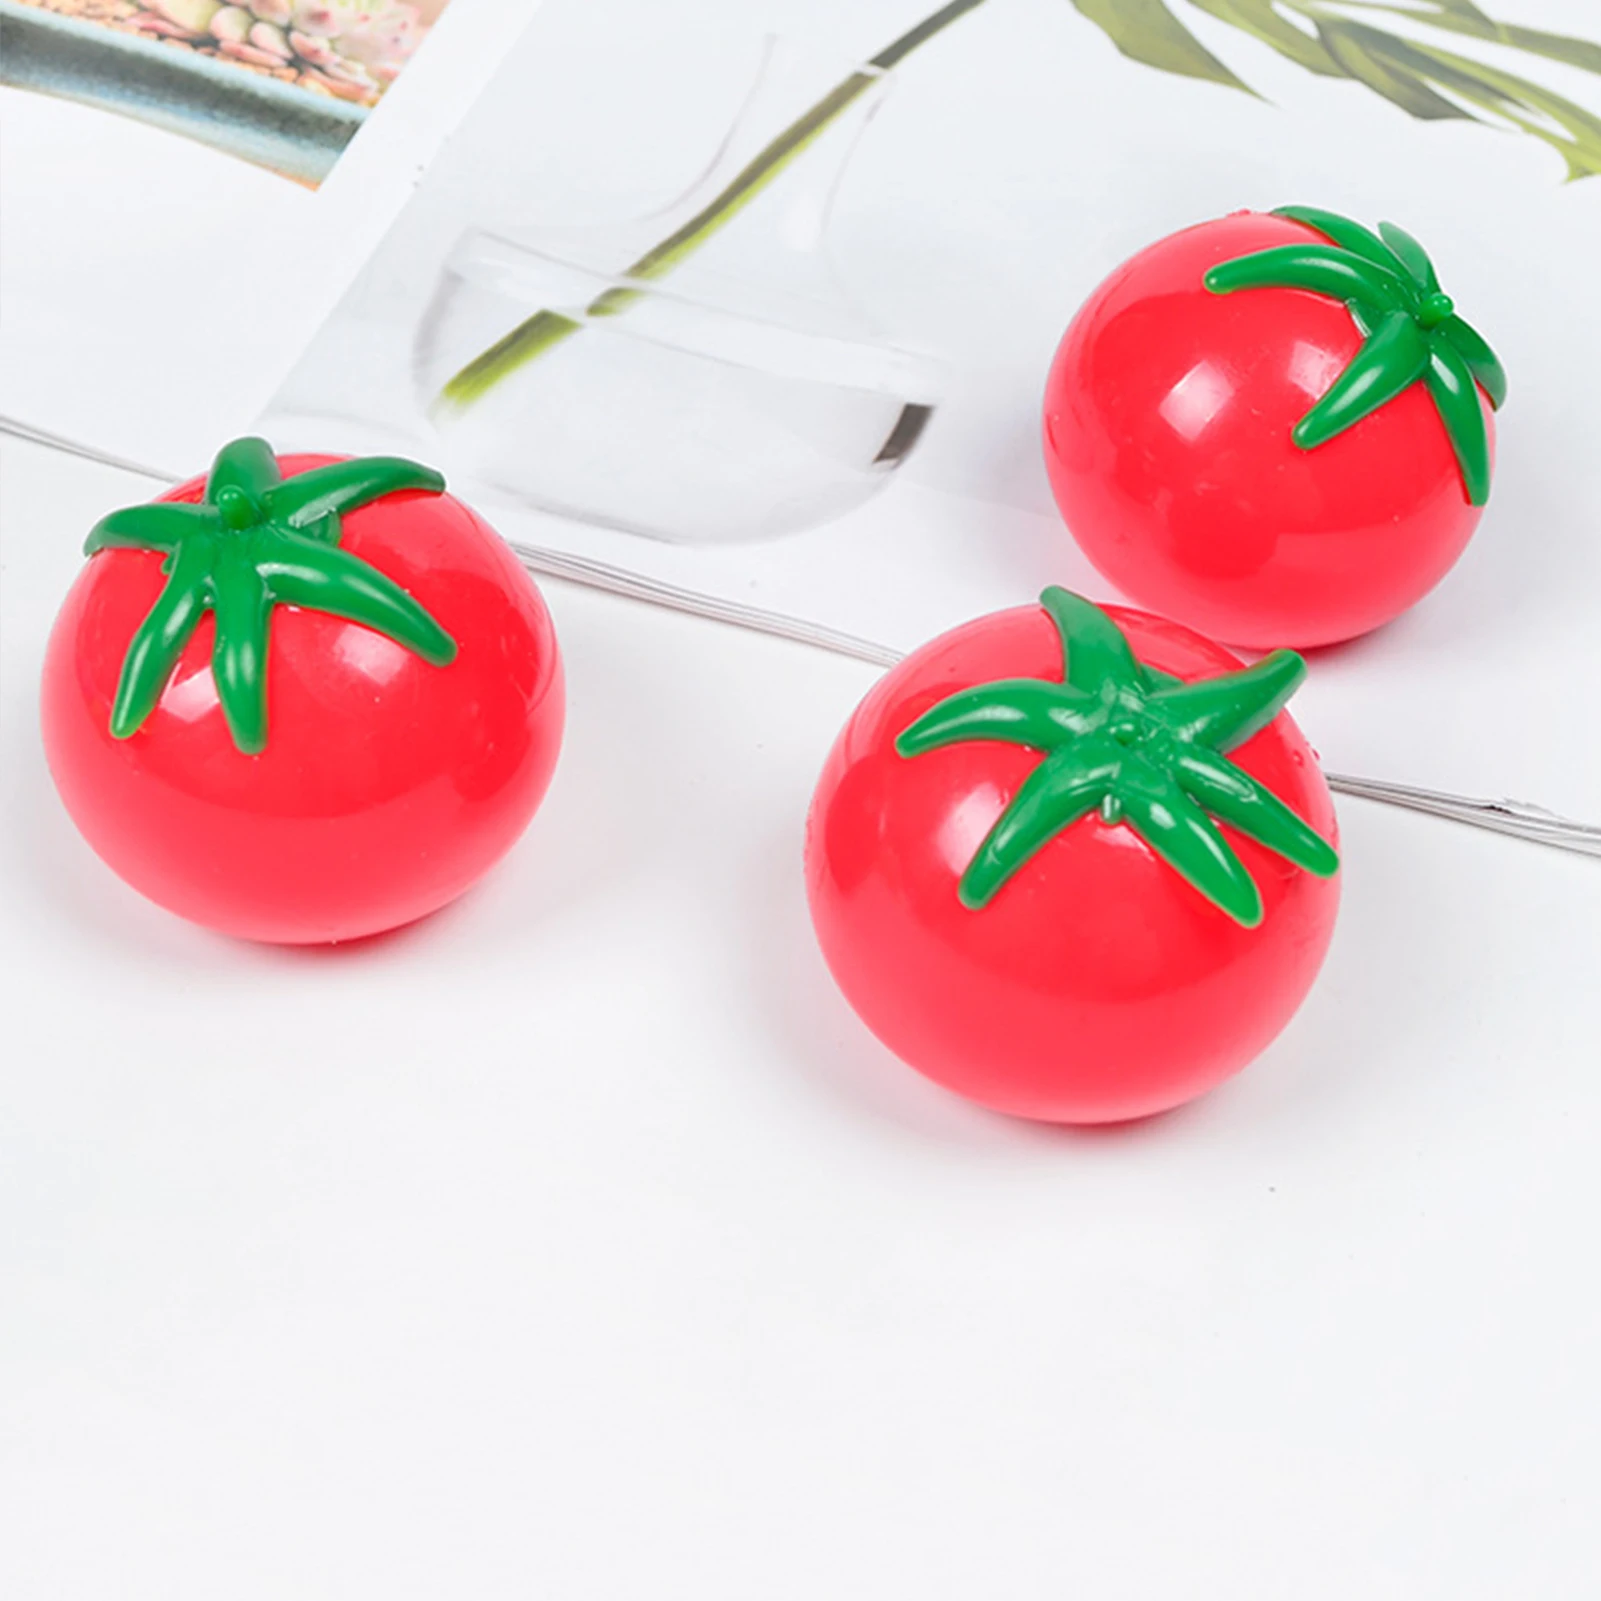 Sticky Tomato Squeeze Toy Fun Stress Reliever Toy For Kids Unbreakable Tomato Vent Water Ball Squeeze Toy enlarge